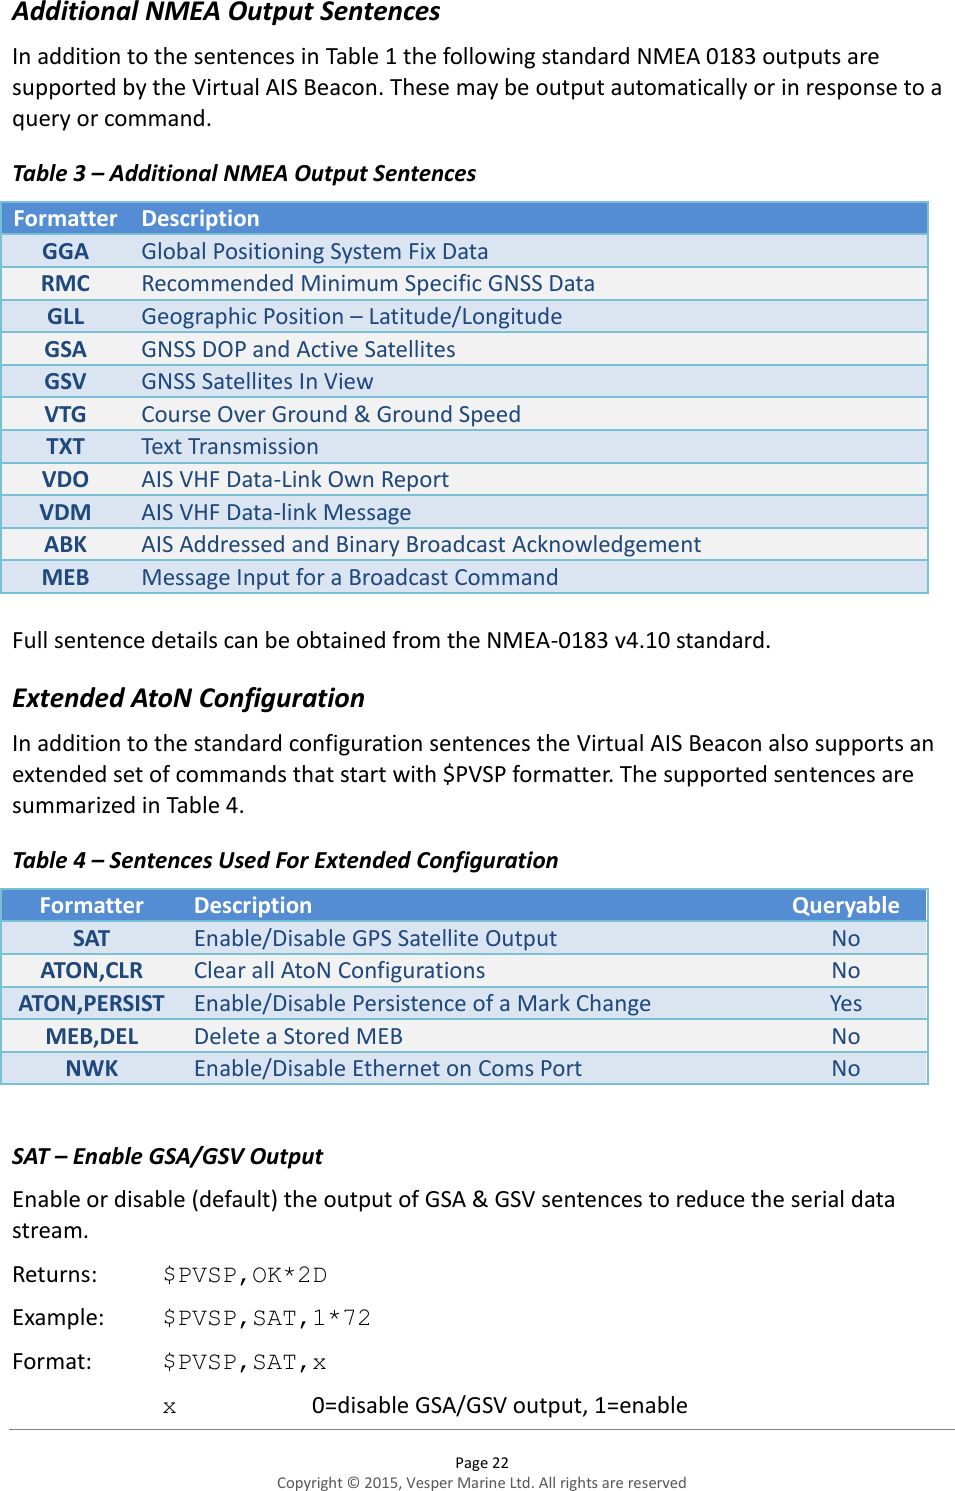  Page 22 Copyright © 2015, Vesper Marine Ltd. All rights are reserved  Additional NMEA Output Sentences In addition to the sentences in Table 1 the following standard NMEA 0183 outputs are supported by the Virtual AIS Beacon. These may be output automatically or in response to a query or command.  Table 3 – Additional NMEA Output Sentences Formatter Description  GGA Global Positioning System Fix Data RMC Recommended Minimum Specific GNSS Data GLL Geographic Position – Latitude/Longitude GSA GNSS DOP and Active Satellites GSV GNSS Satellites In View VTG Course Over Ground &amp; Ground Speed TXT Text Transmission VDO AIS VHF Data-Link Own Report VDM AIS VHF Data-link Message ABK AIS Addressed and Binary Broadcast Acknowledgement MEB Message Input for a Broadcast Command  Full sentence details can be obtained from the NMEA-0183 v4.10 standard. Extended AtoN Configuration In addition to the standard configuration sentences the Virtual AIS Beacon also supports an extended set of commands that start with $PVSP formatter. The supported sentences are summarized in Table 4. Table 4 – Sentences Used For Extended Configuration Formatter Description  Queryable SAT Enable/Disable GPS Satellite Output No ATON,CLR Clear all AtoN Configurations No ATON,PERSIST Enable/Disable Persistence of a Mark Change Yes MEB,DEL Delete a Stored MEB  No NWK Enable/Disable Ethernet on Coms Port No  SAT – Enable GSA/GSV Output Enable or disable (default) the output of GSA &amp; GSV sentences to reduce the serial data stream. Returns:   $PVSP,OK*2D Example:  $PVSP,SAT,1*72 Format:  $PVSP,SAT,x x    0=disable GSA/GSV output, 1=enable 